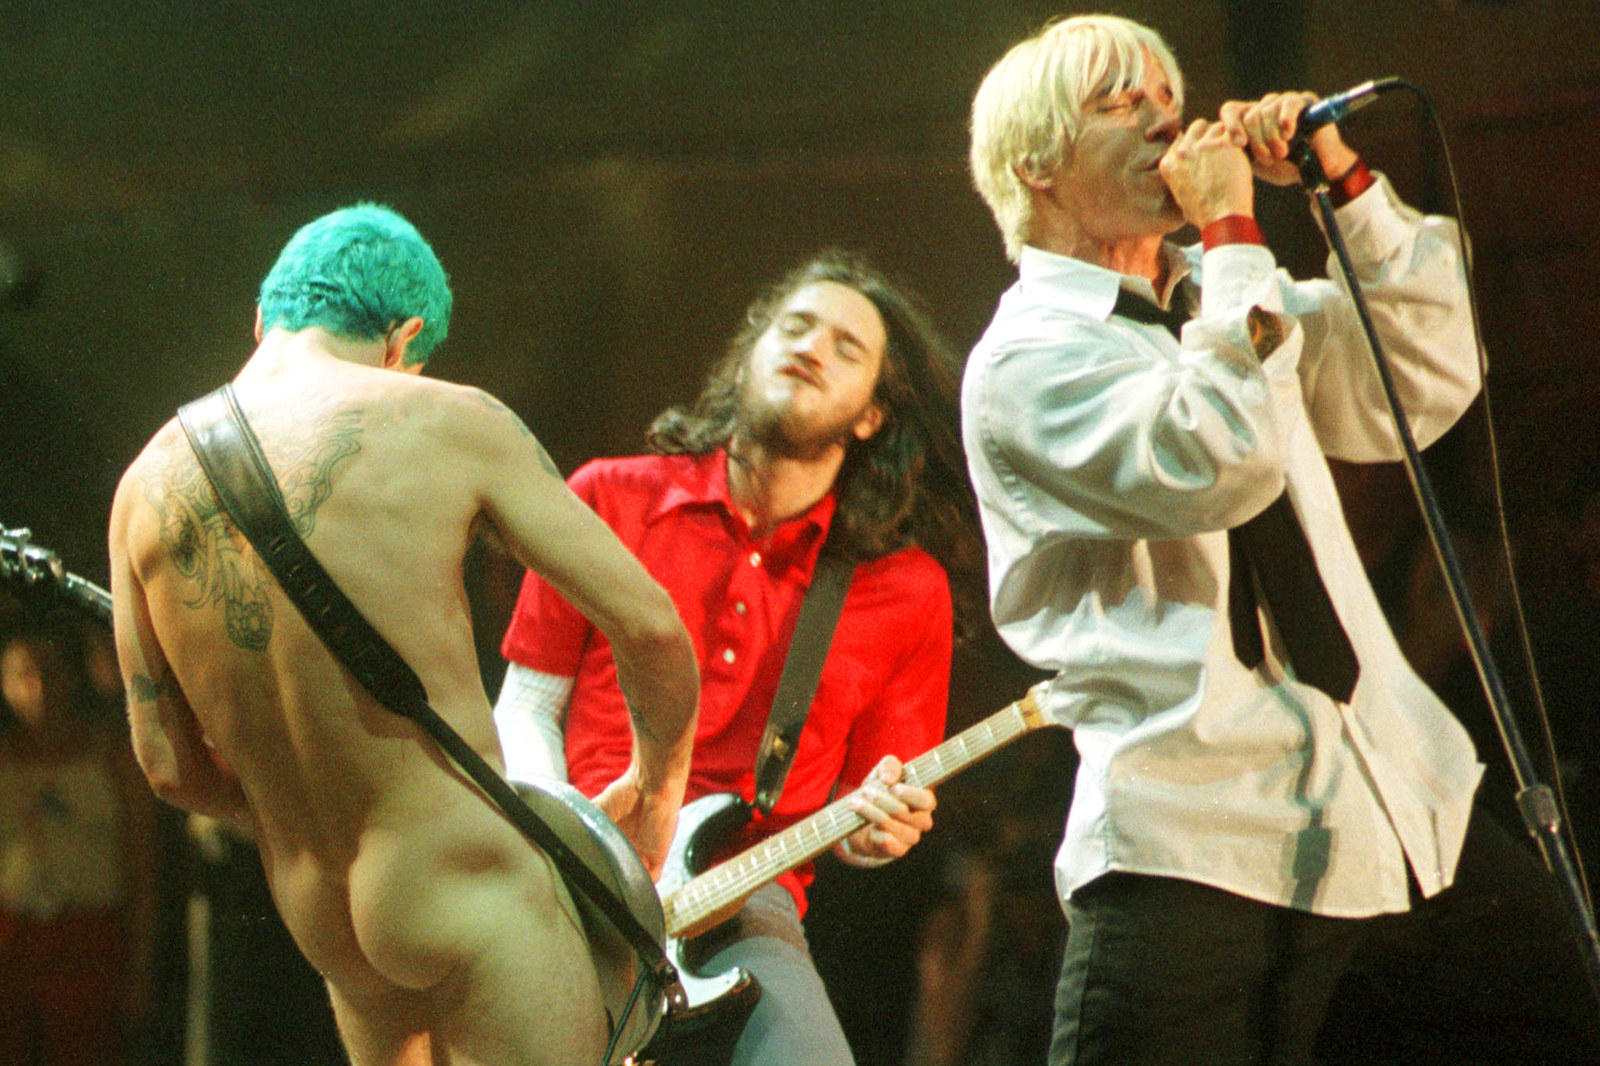 These Pictures Show Just How Much Of A Shitshow Woodstock '99 Was.